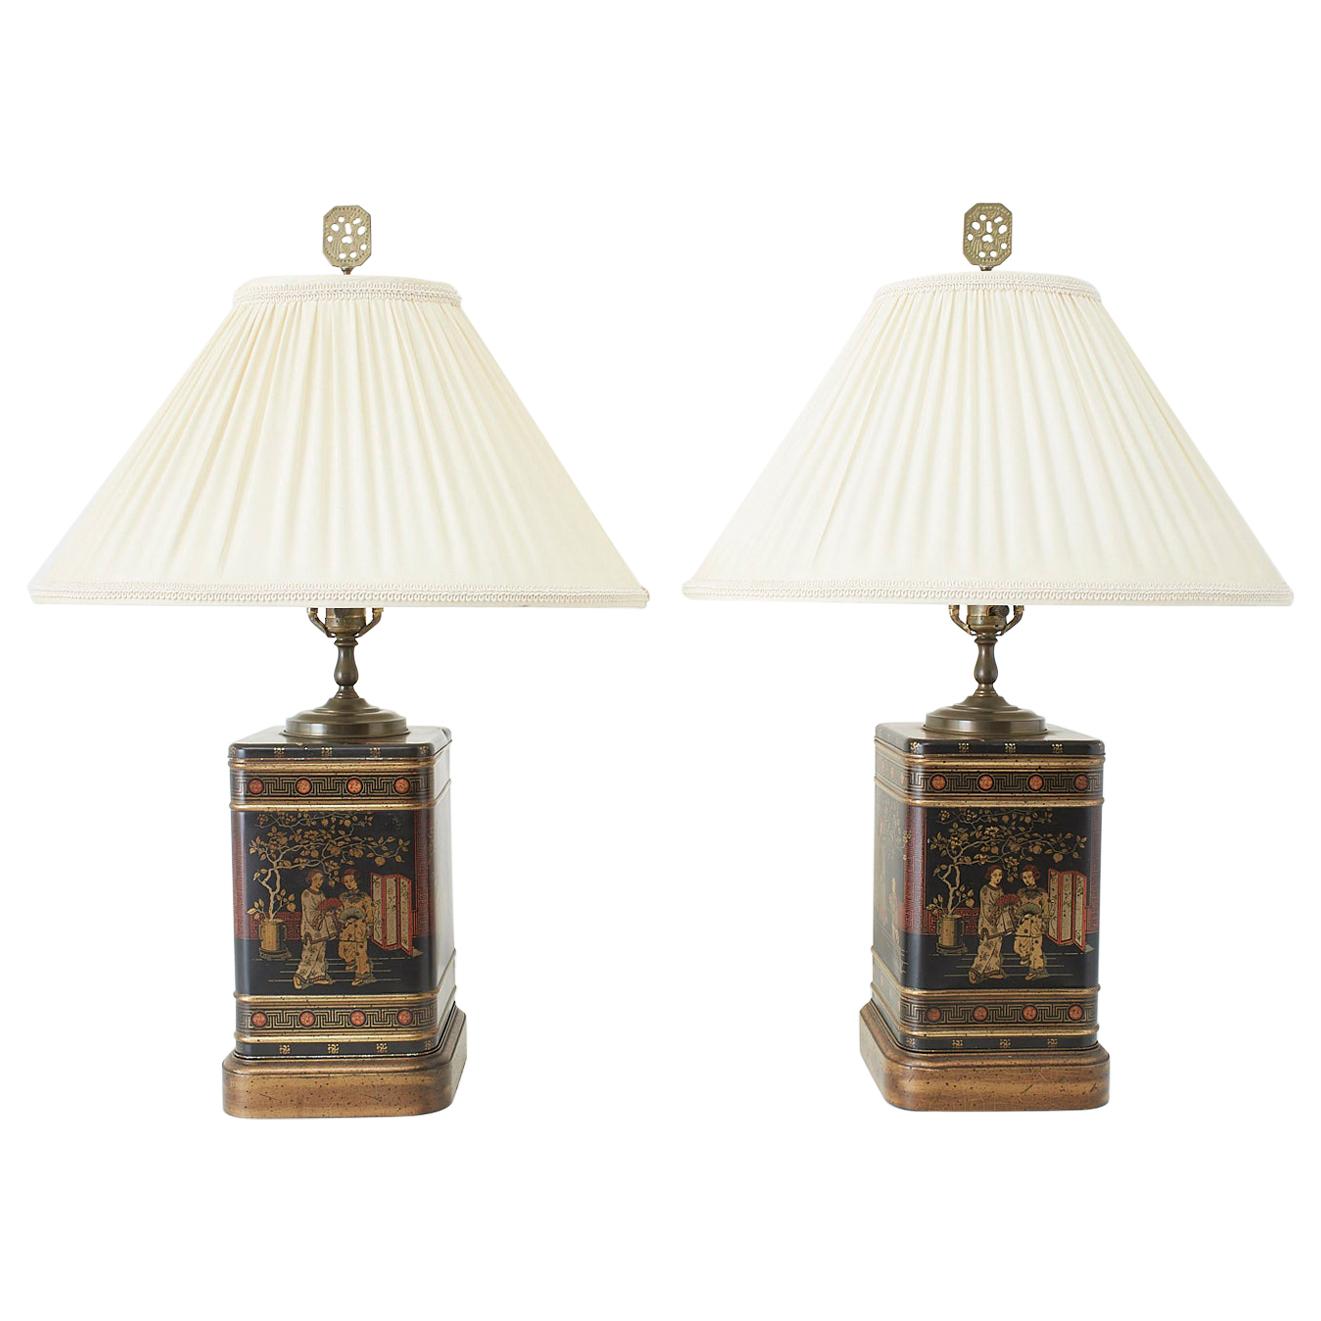 Pair of Chinoiserie Decorated Tole Tea Canister Lamps